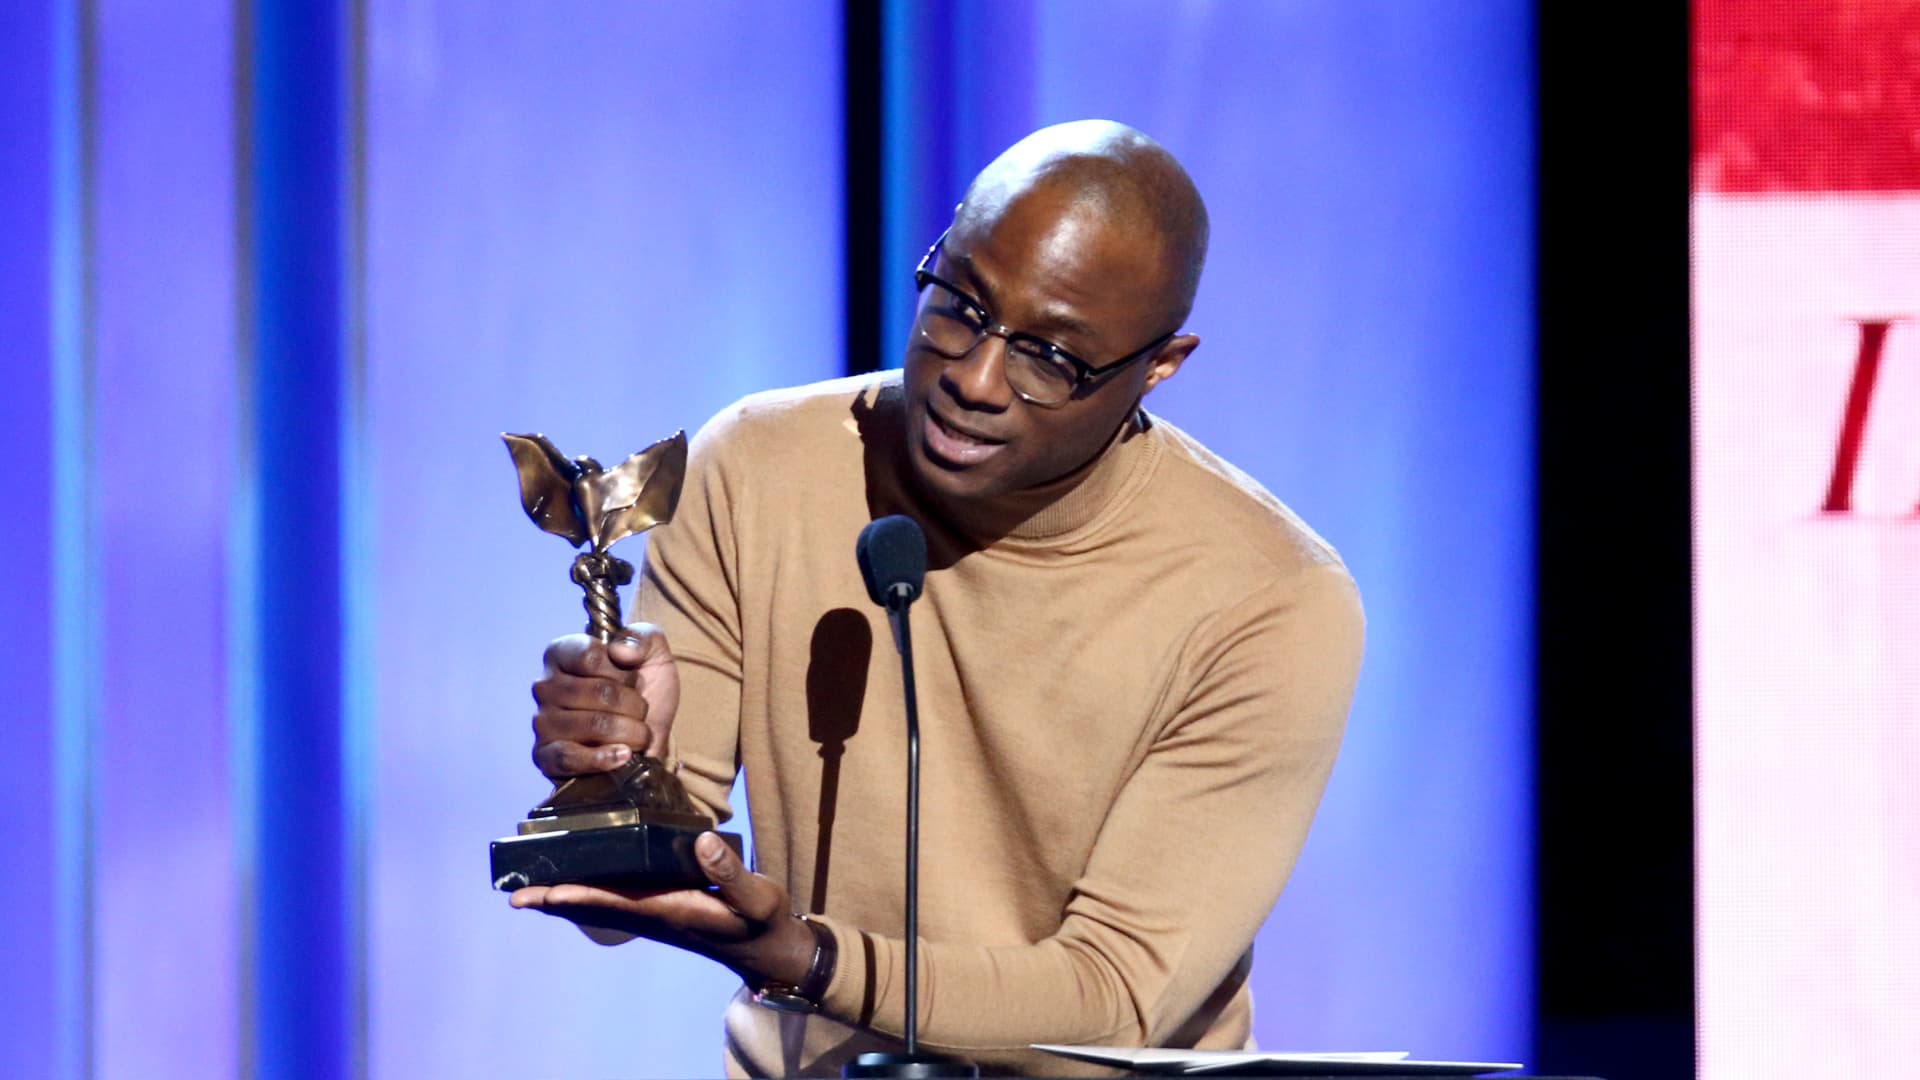 Barry Jenkins acceptsBest Director for “If Beale Street Could Talk” onstage during the 2019 Film Independent Spirit Awards on February 23, 2019 in Santa Monica, California. (Photo by Tommaso Boddi/Getty Images)